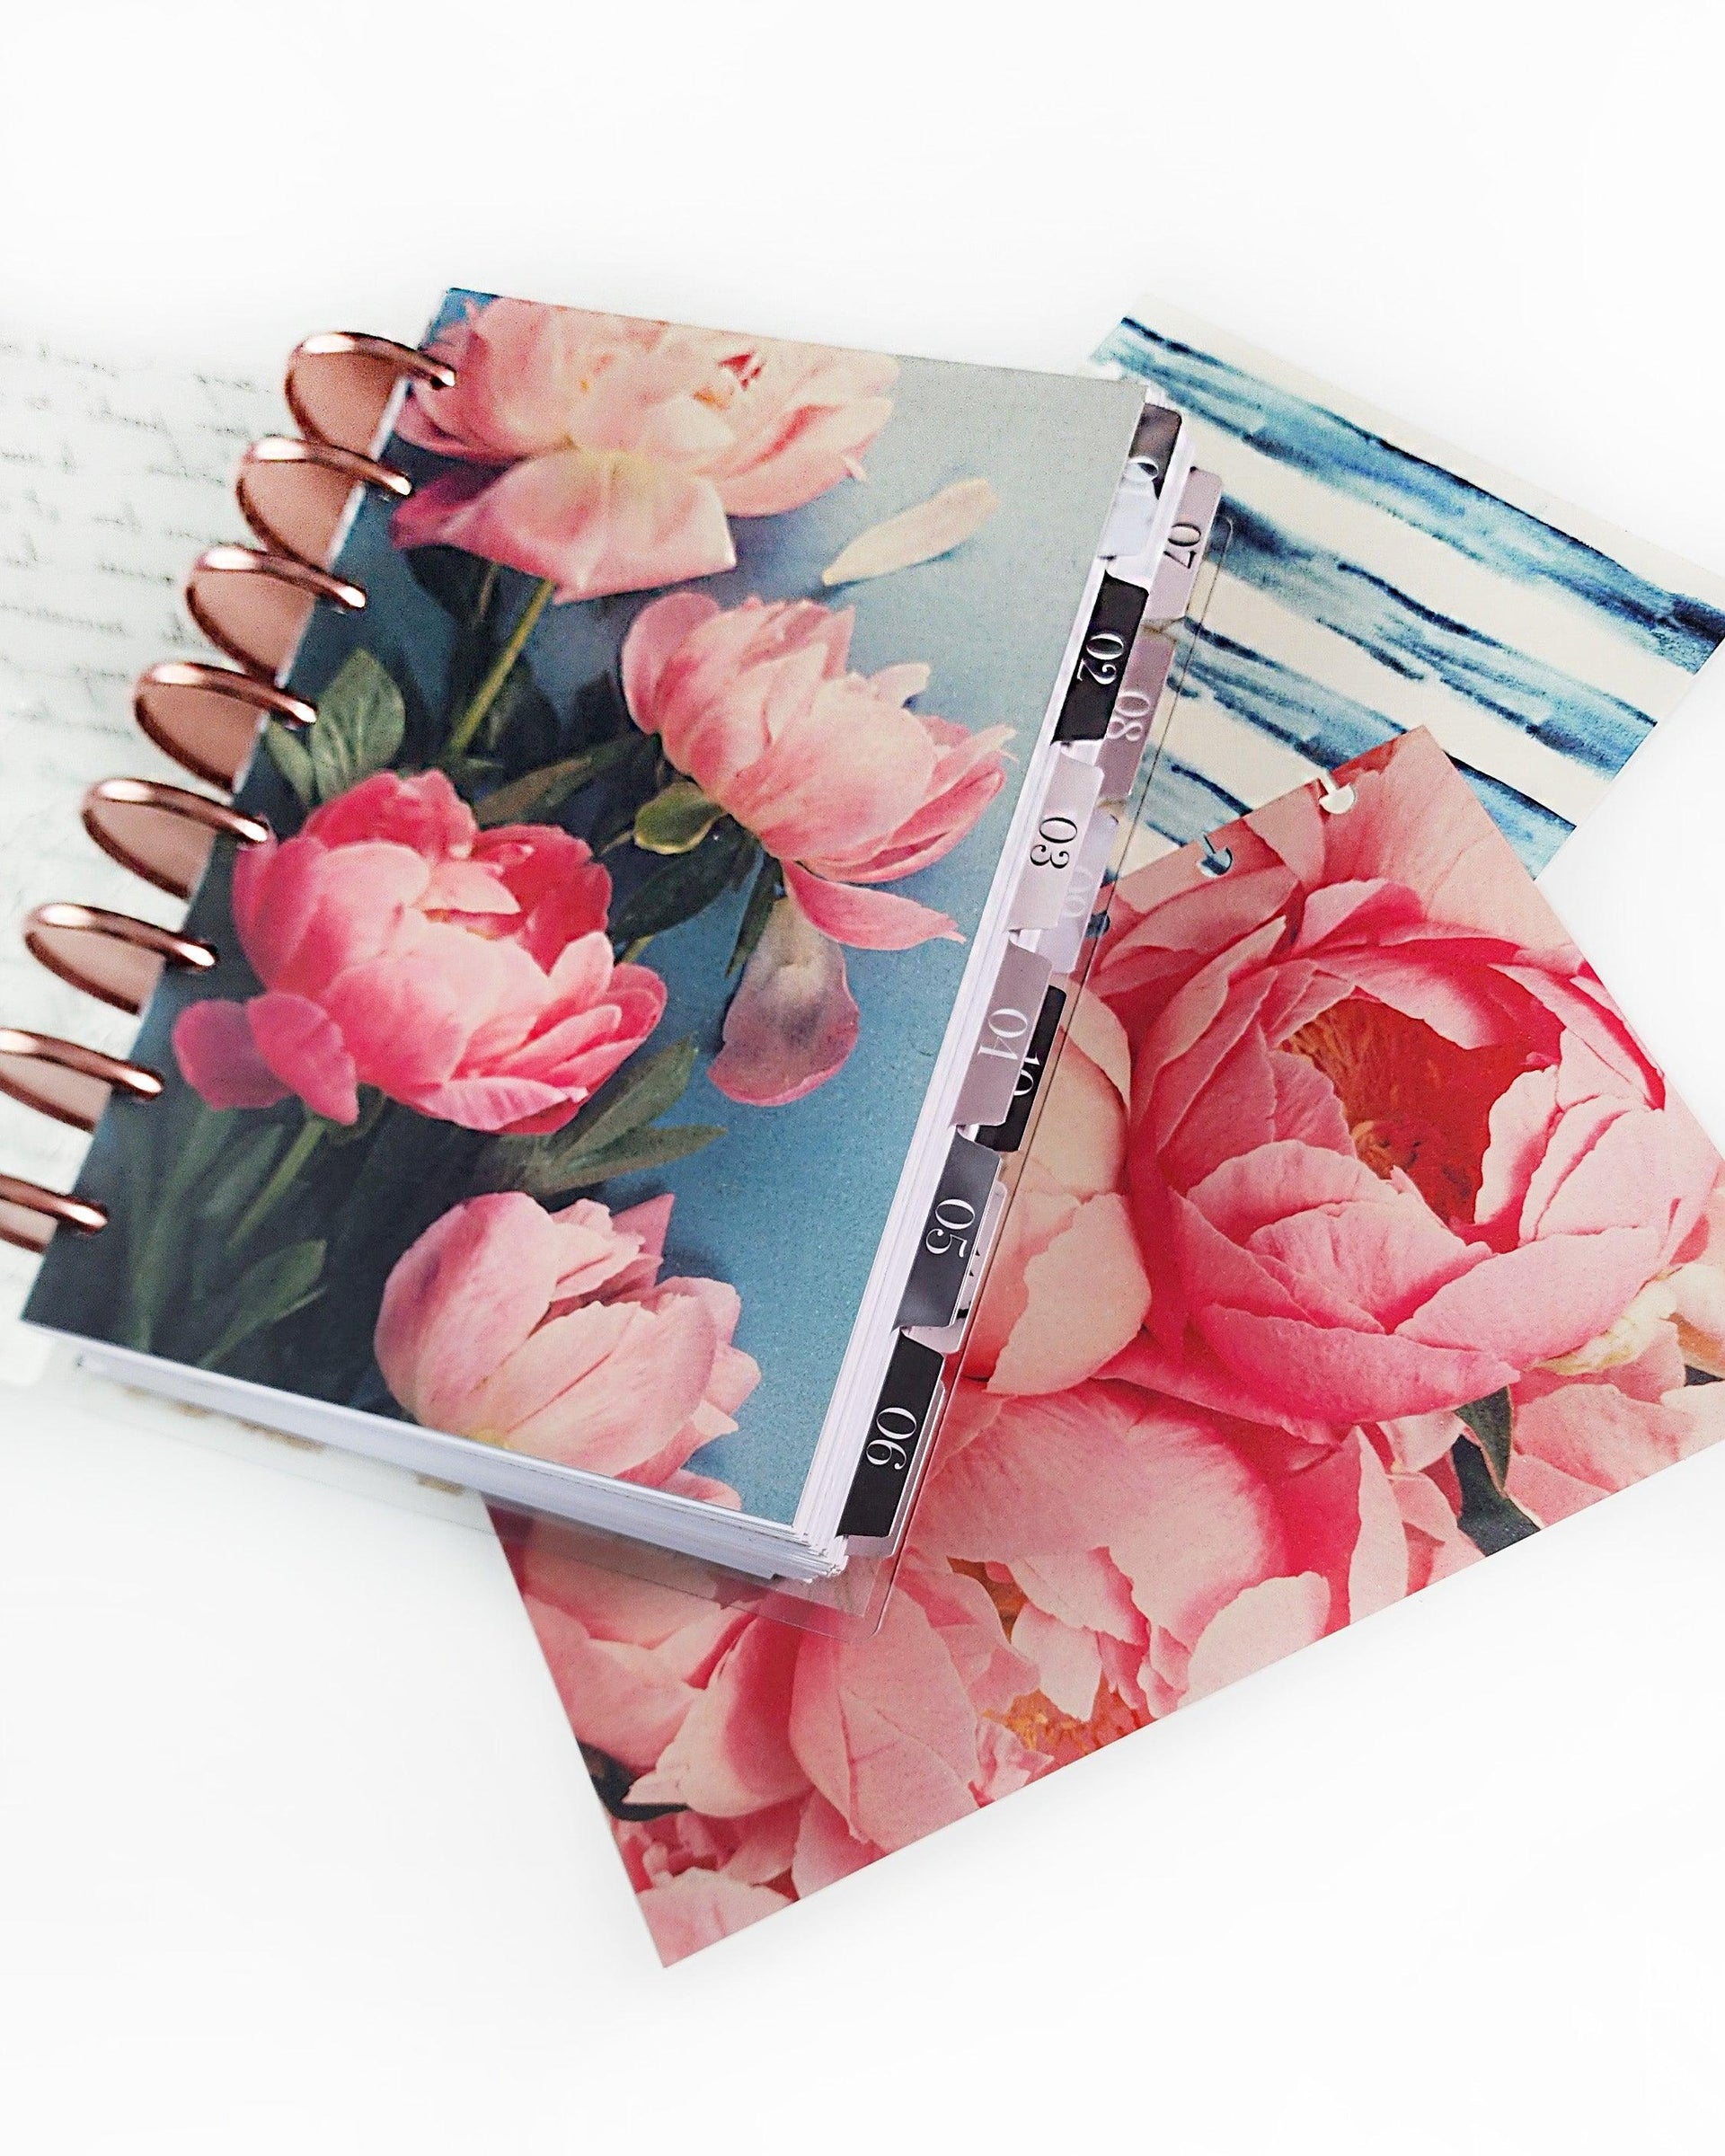 floral planner dashboards for discbound and ringbound planner systems by Jane's Agenda.